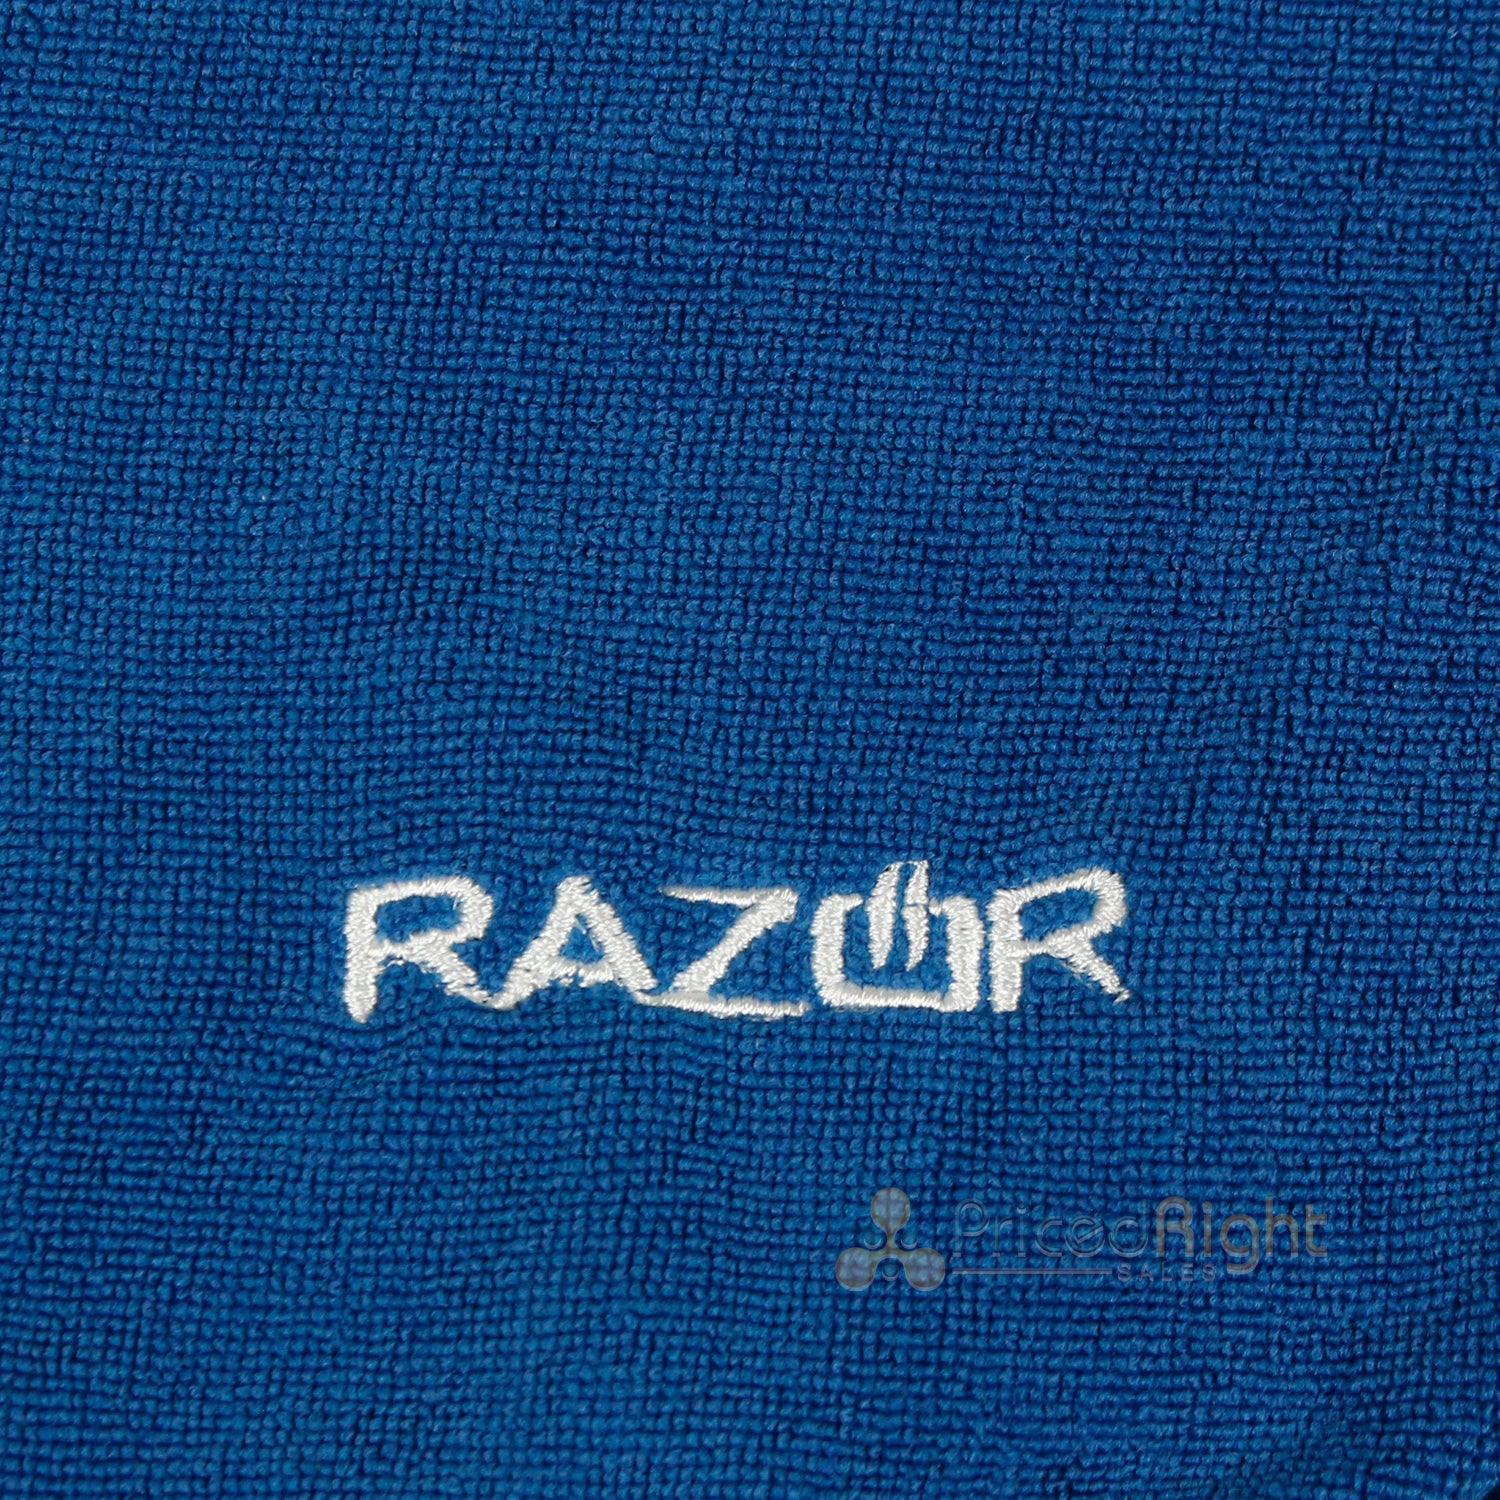 Razor Microfiber Cleaning Cloth Griddle Towels Lint-Free Machine Washable 2 Pack